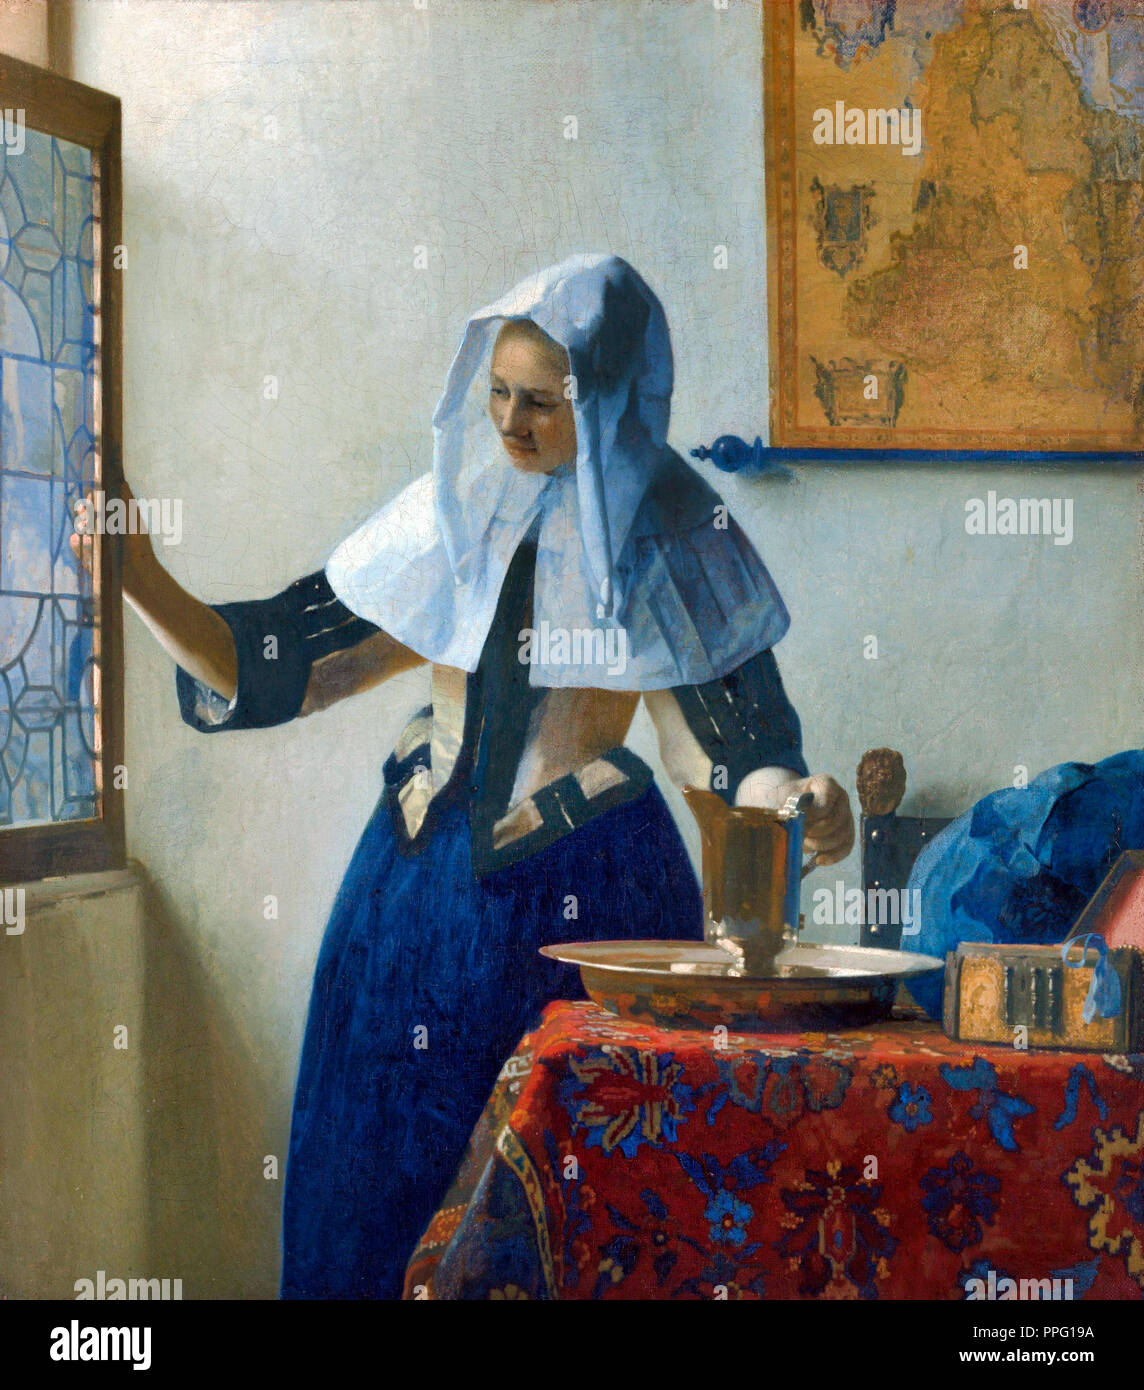 Johannes Vermeer - Young Woman with a Water Pitcher. Circa 1662. Oil on canvas. Metropolitan Museum of Art, New York City, USA. Stock Photo